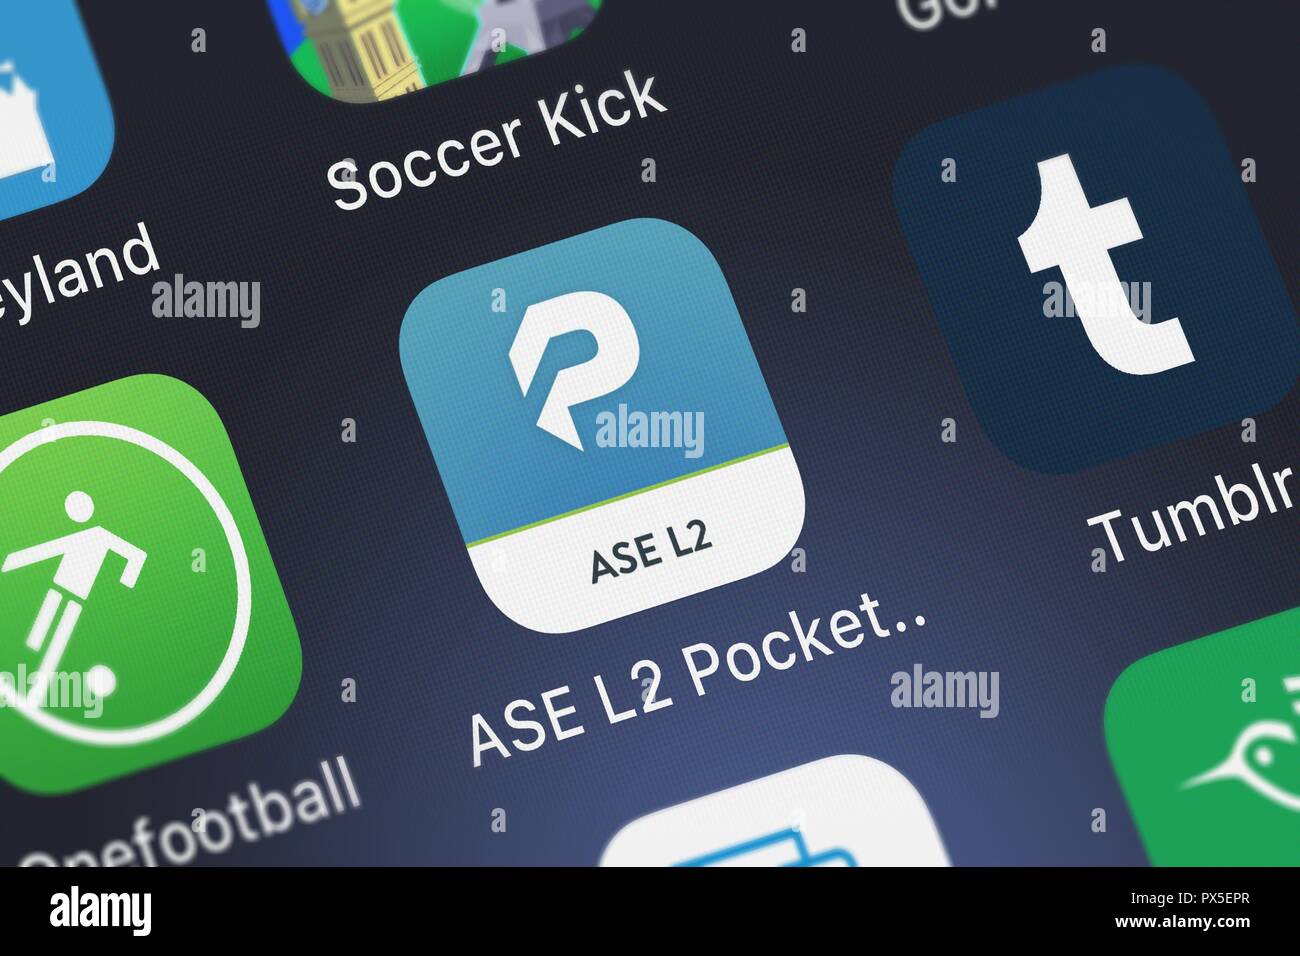 London, United Kingdom - October 19, 2018: Close-up shot of the ASE L2 Pocket Prep application icon from Pocket Prep, Inc. on an iPhone. Stock Photo